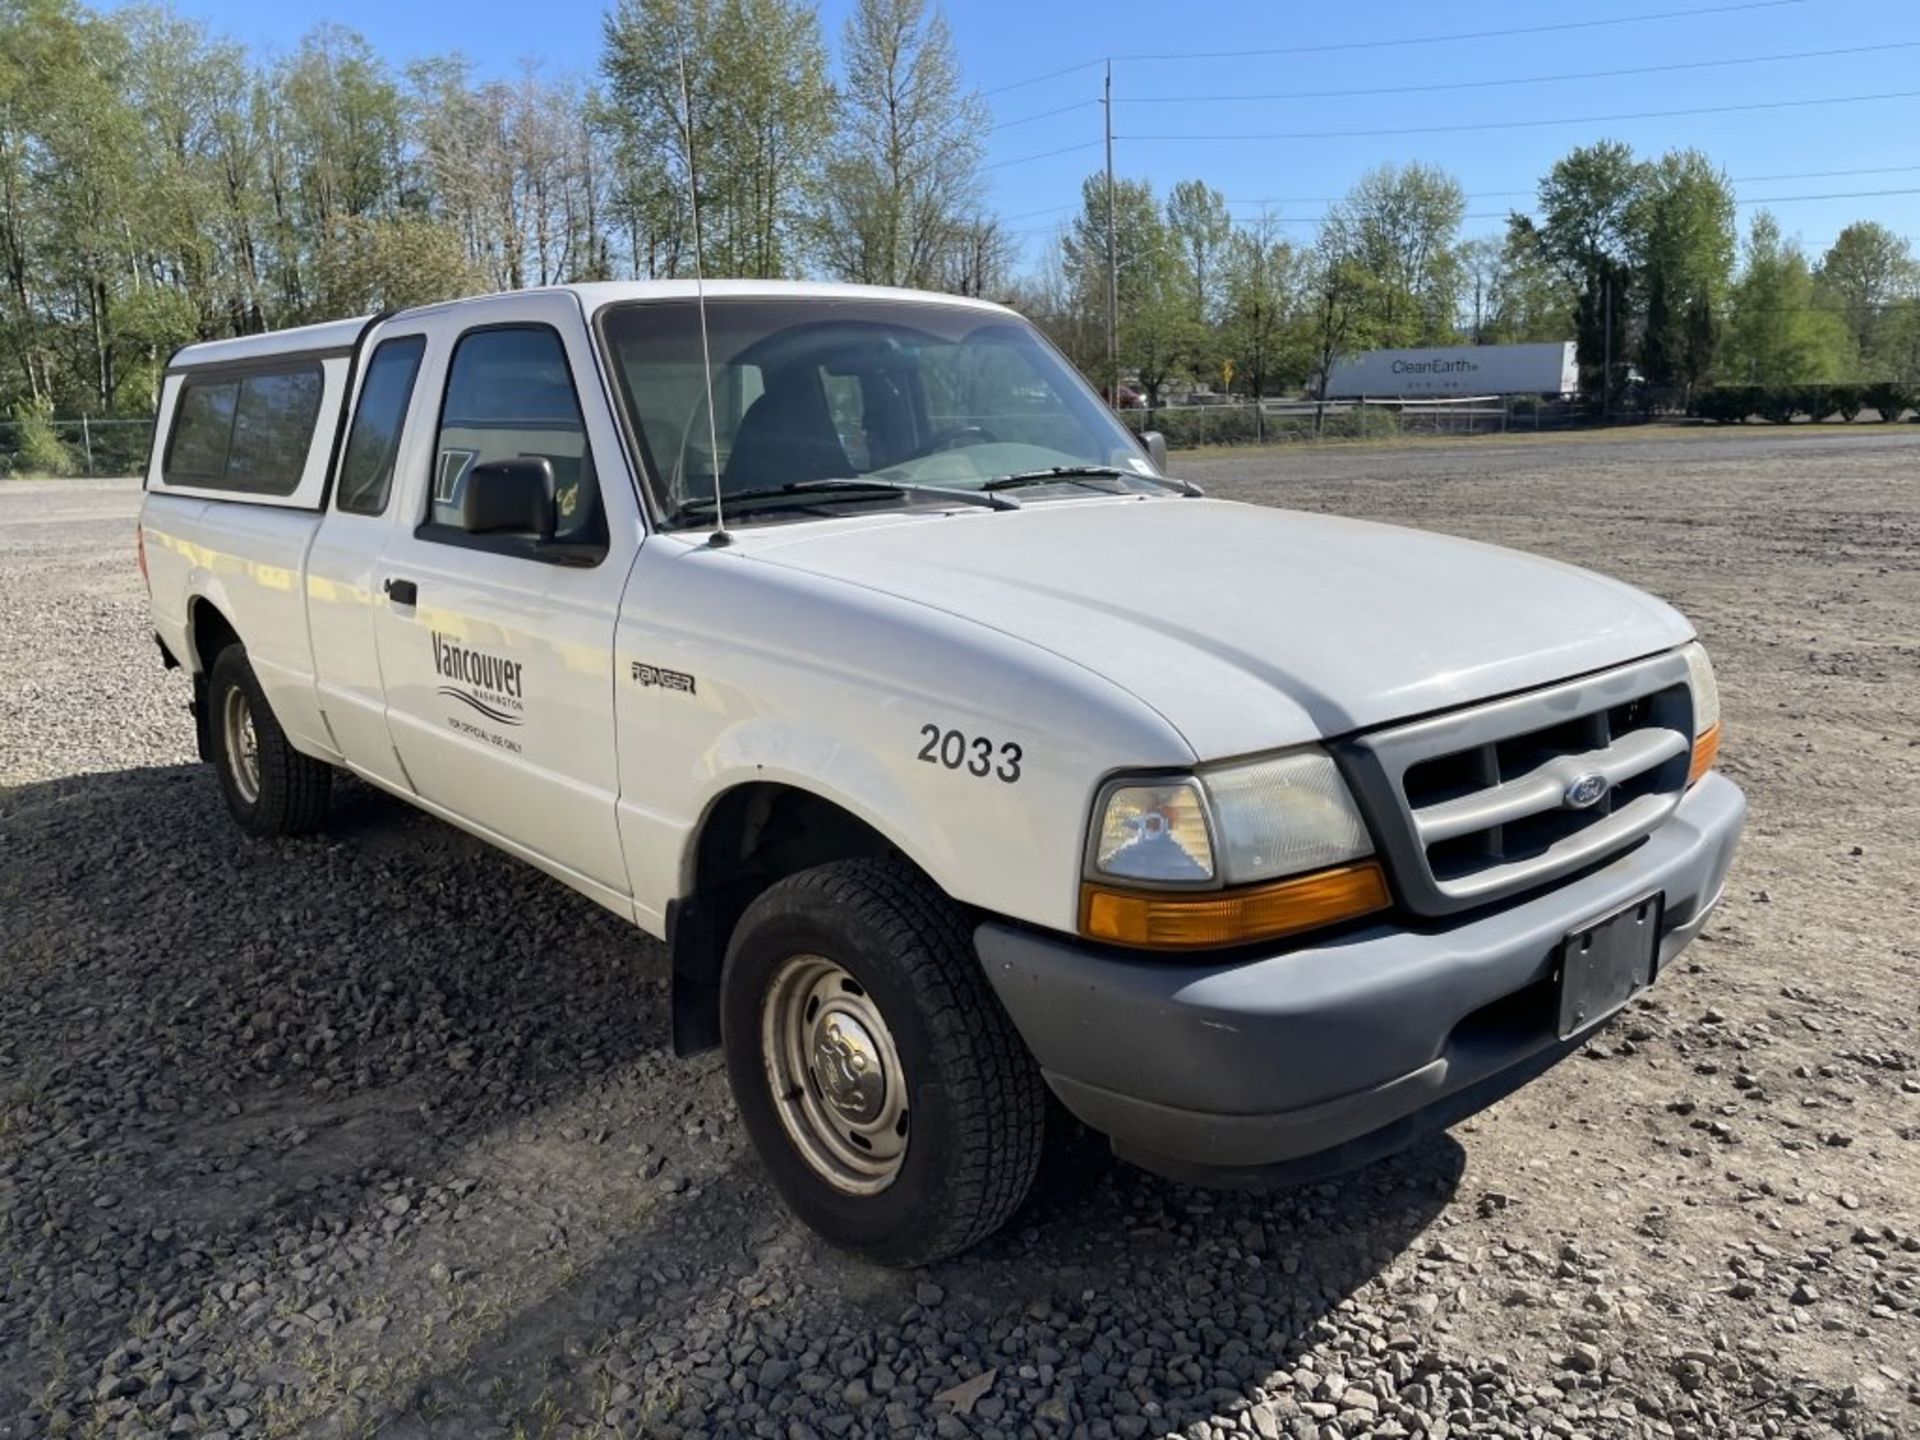 1998 Ford Ranger Extra Cab Pickup - Image 2 of 14